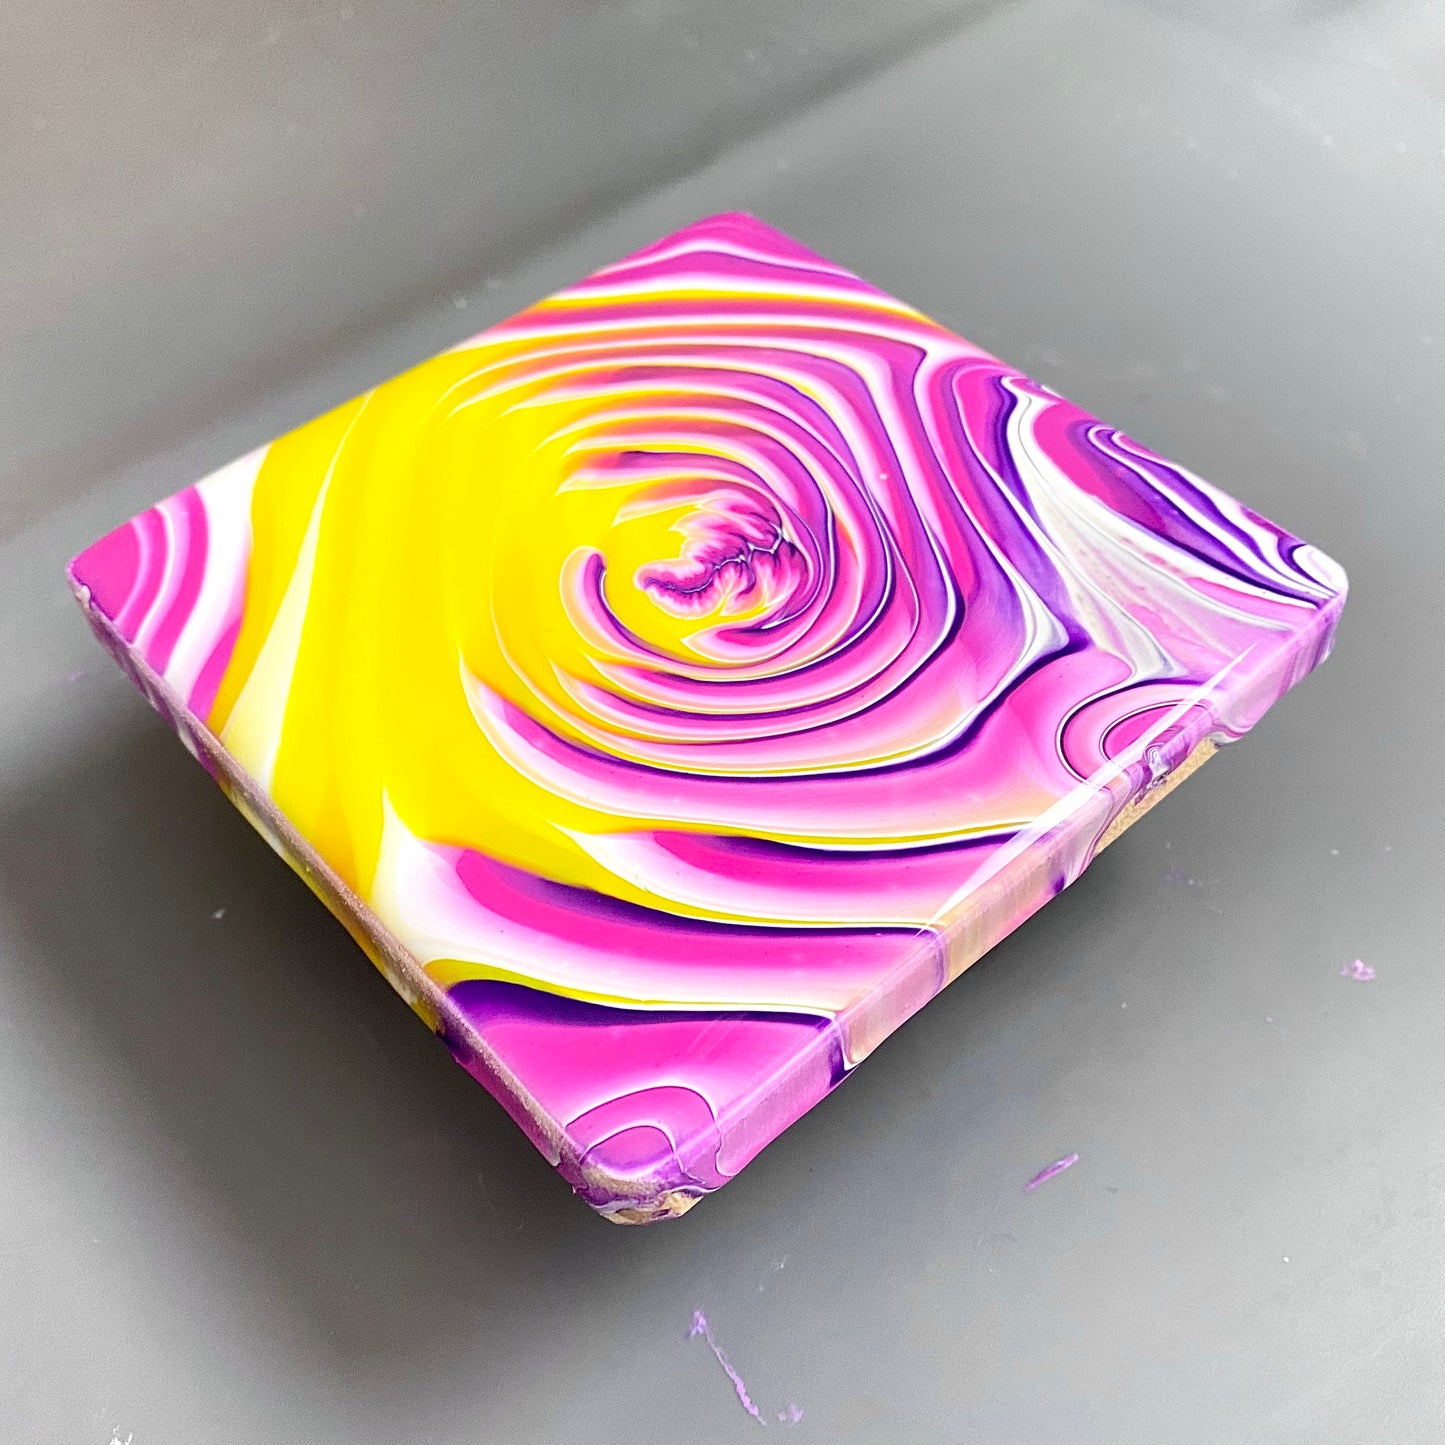 Gee Pours Beginner Acrylic Pour Kit and Class